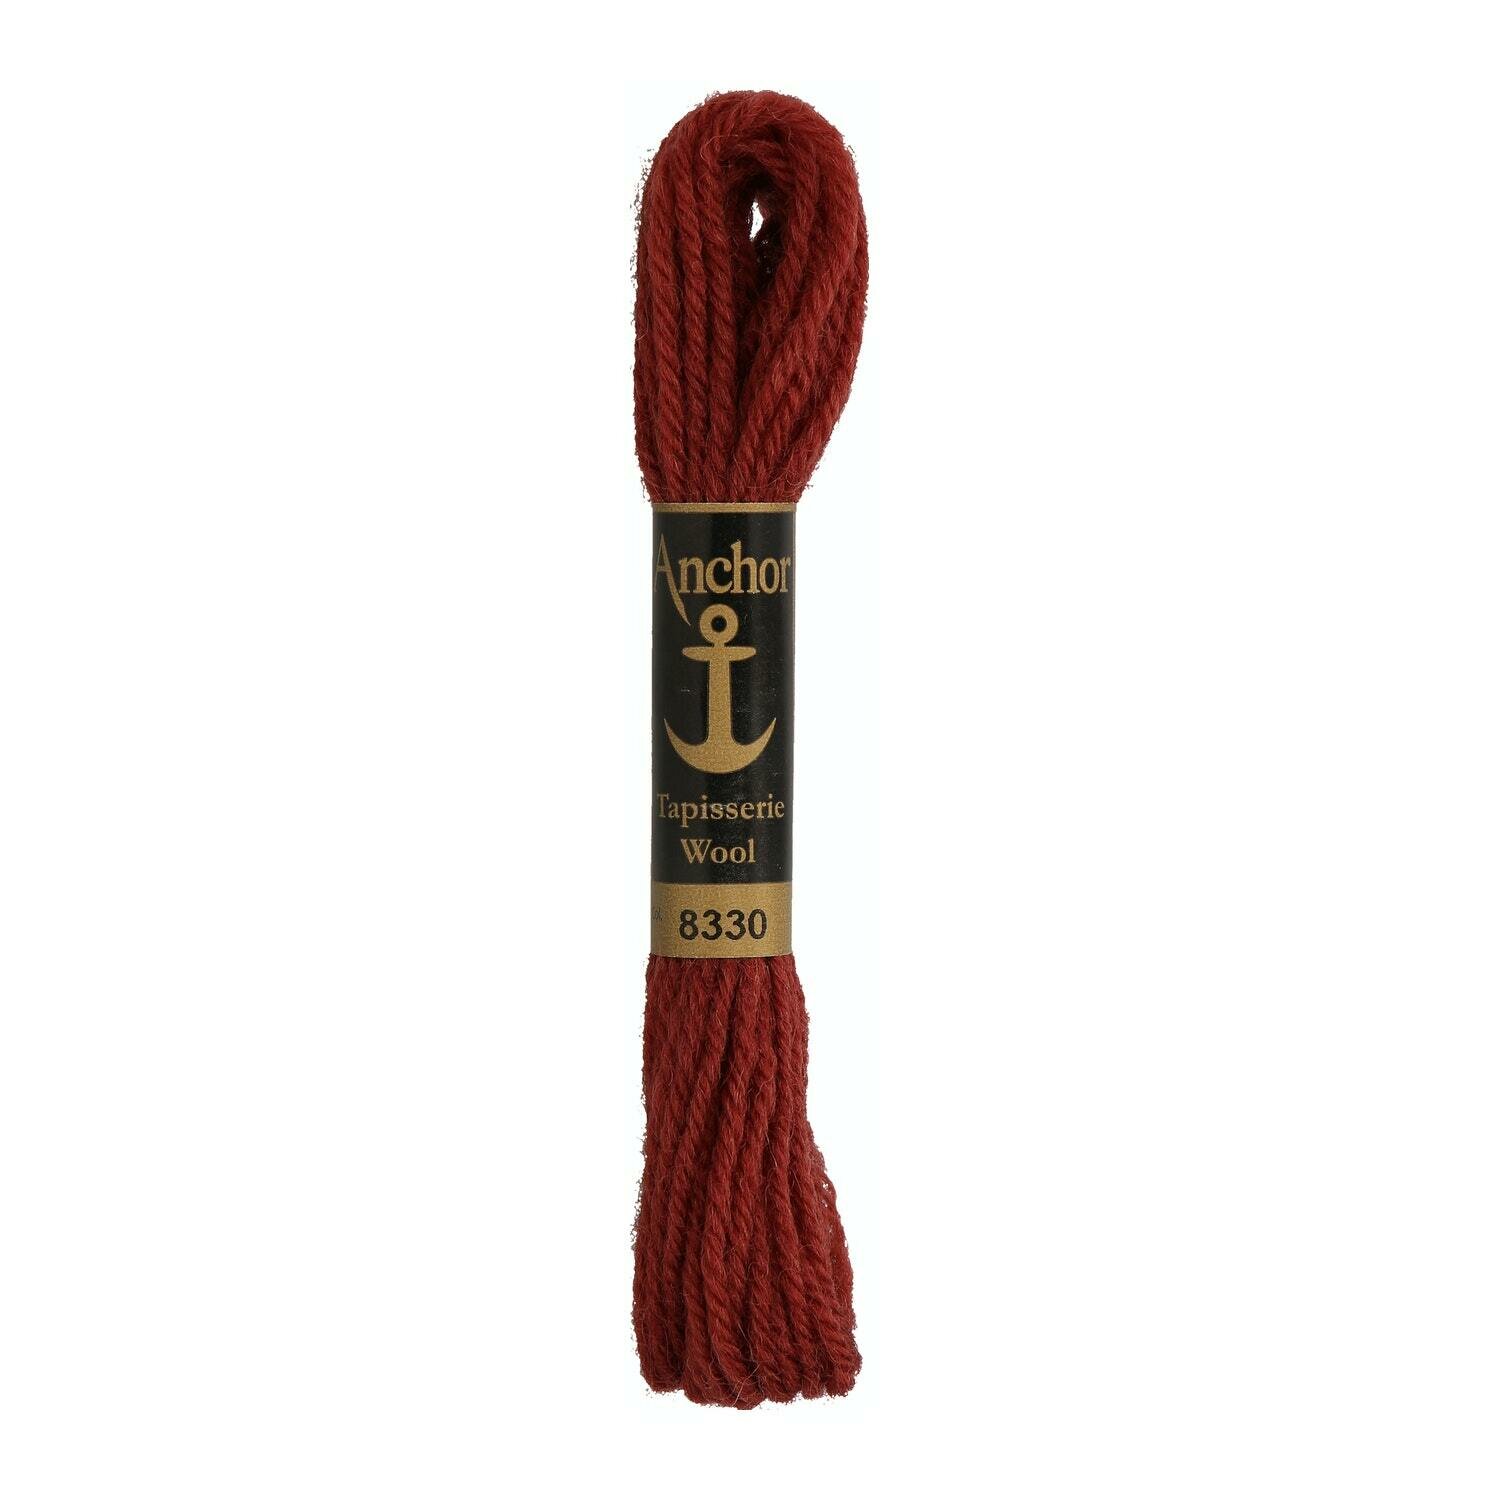 Anchor Tapisserie Wool #  08330